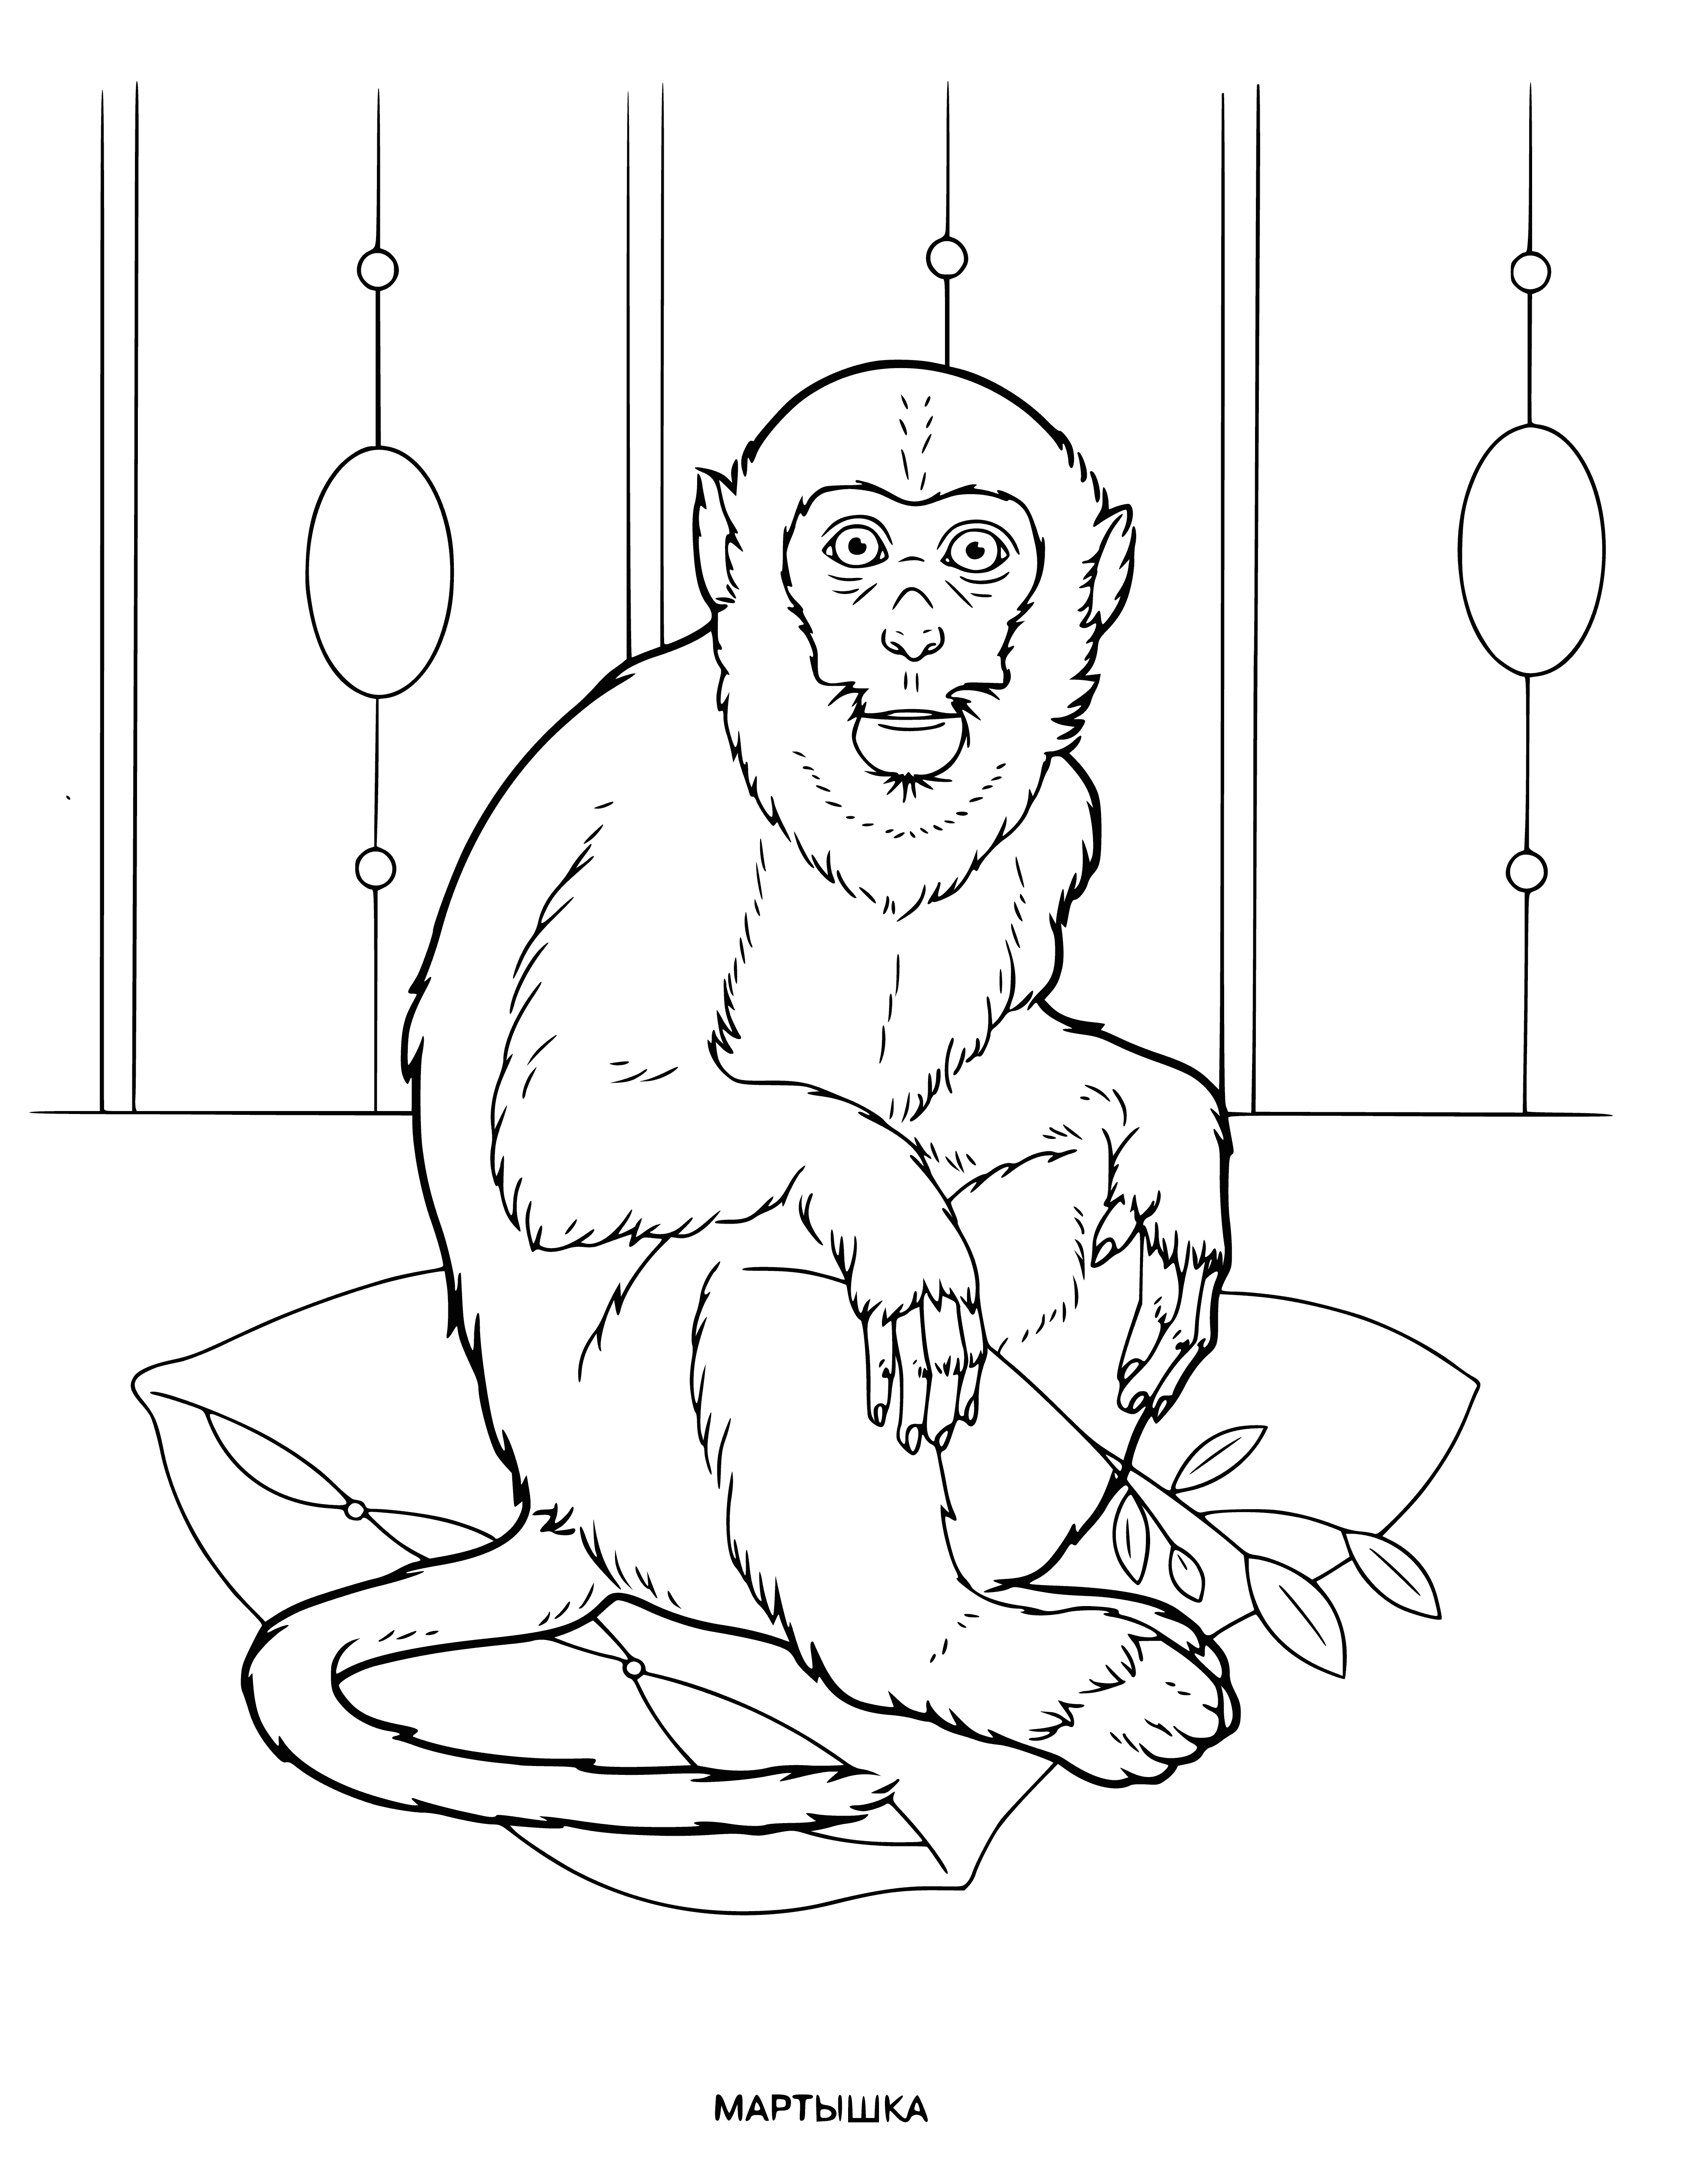 coloring page: Monkey eating a banana in a blue shirt while standing on a tree branch. #BananaLover